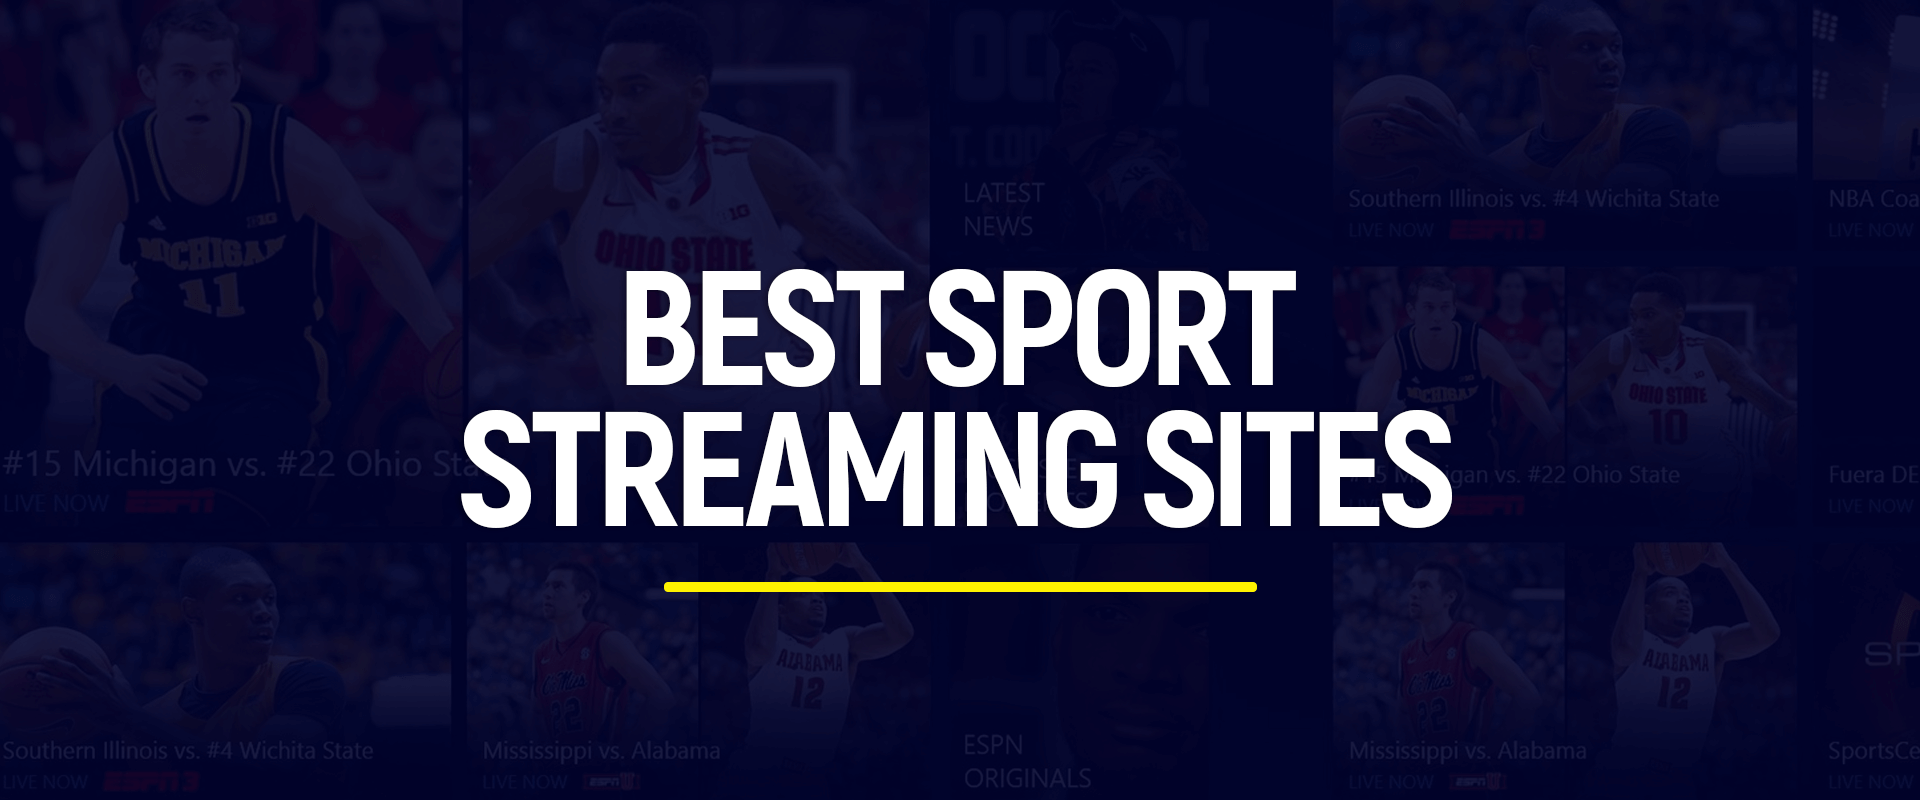 sund fornuft huh Sanctuary 12 Best Online Streaming Sites for Your Favorite Sports